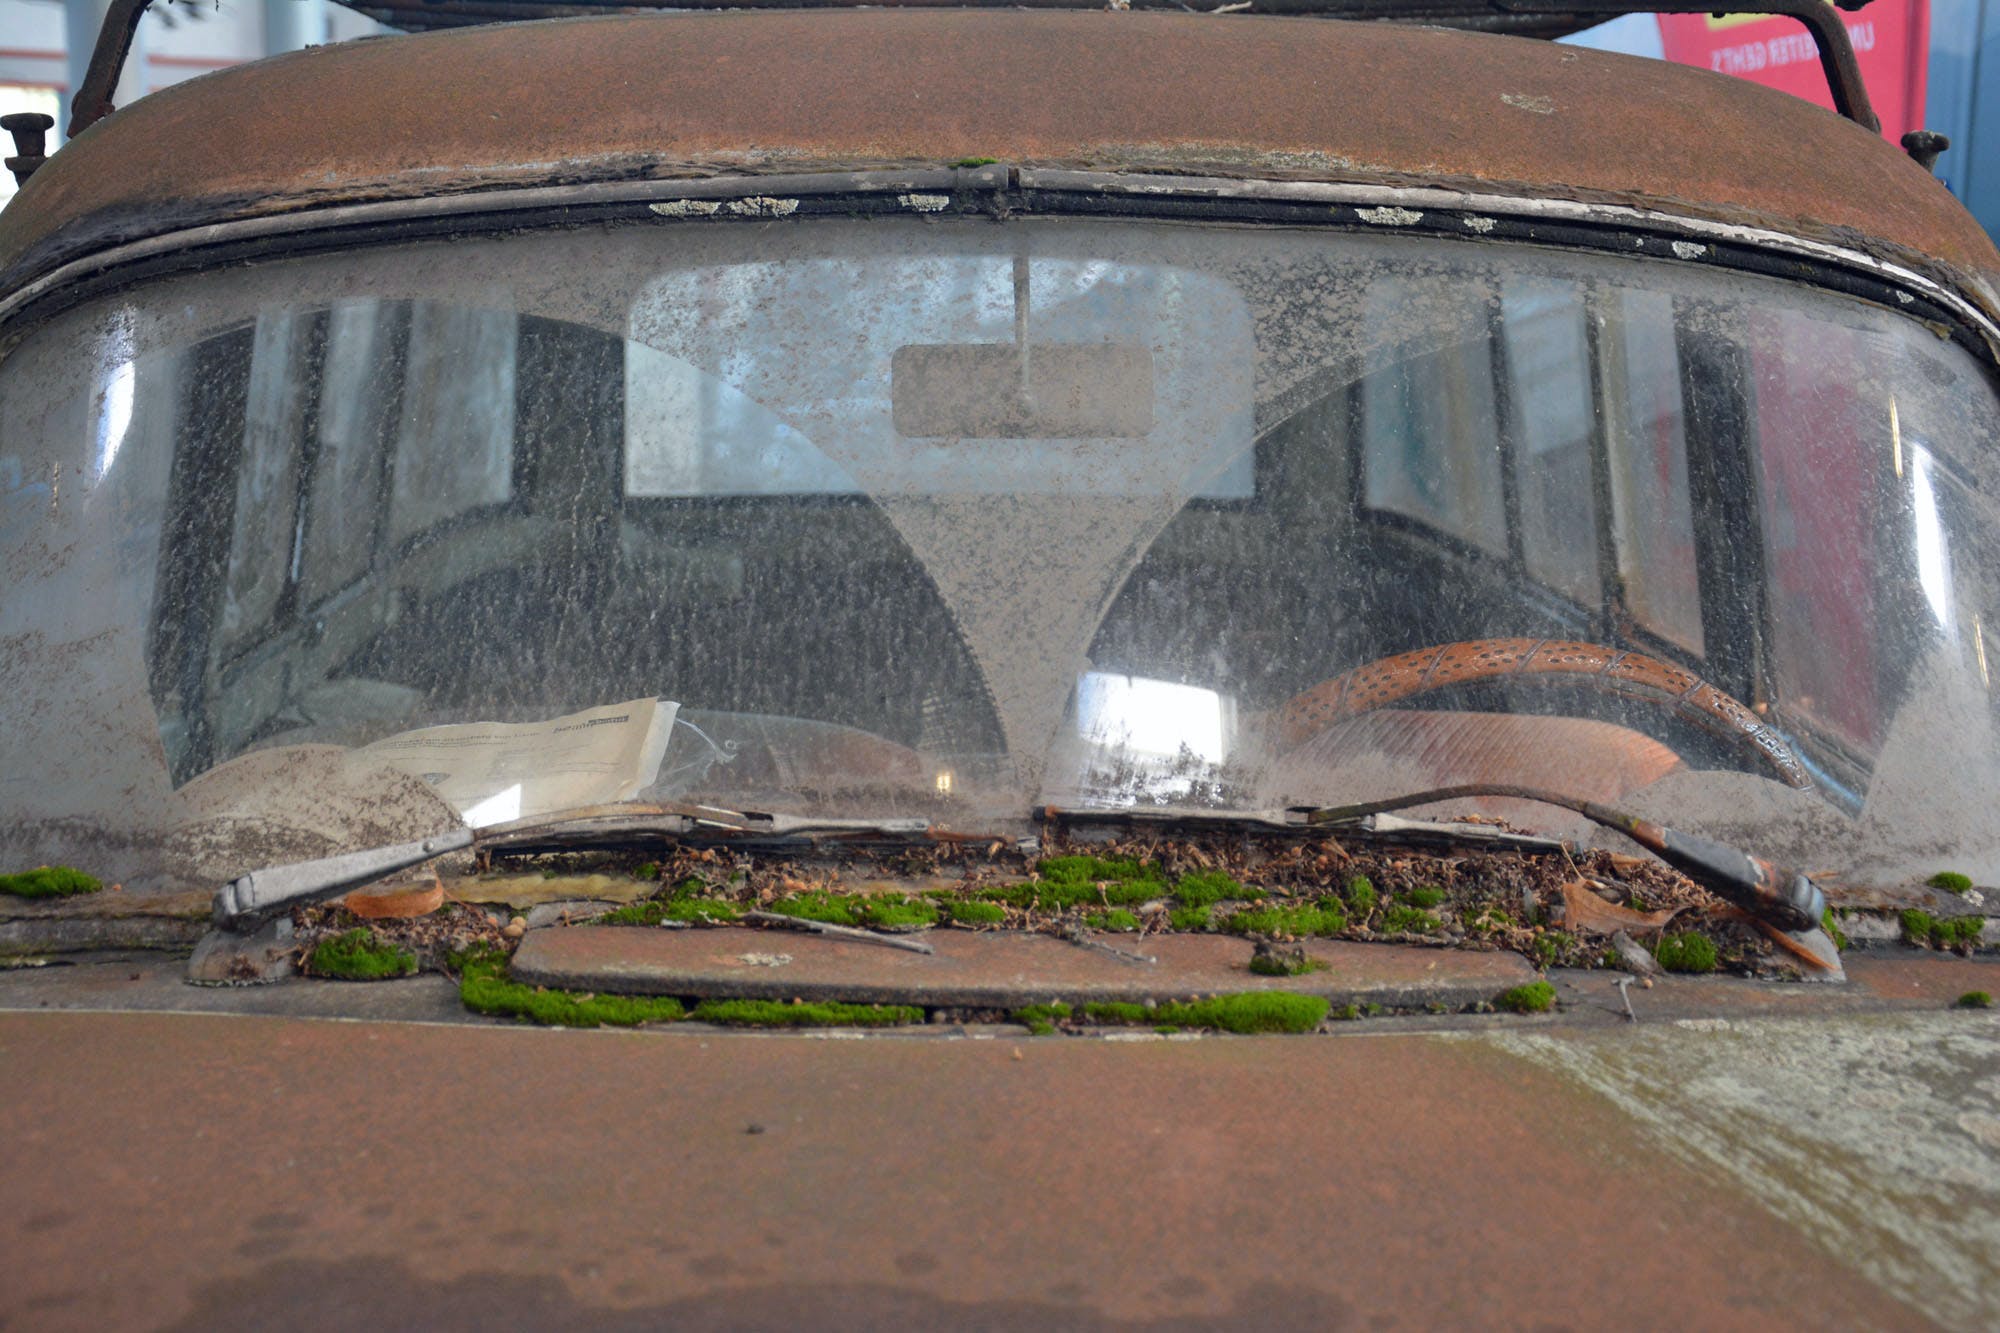 Berlin’s most famous car is also its filthiest